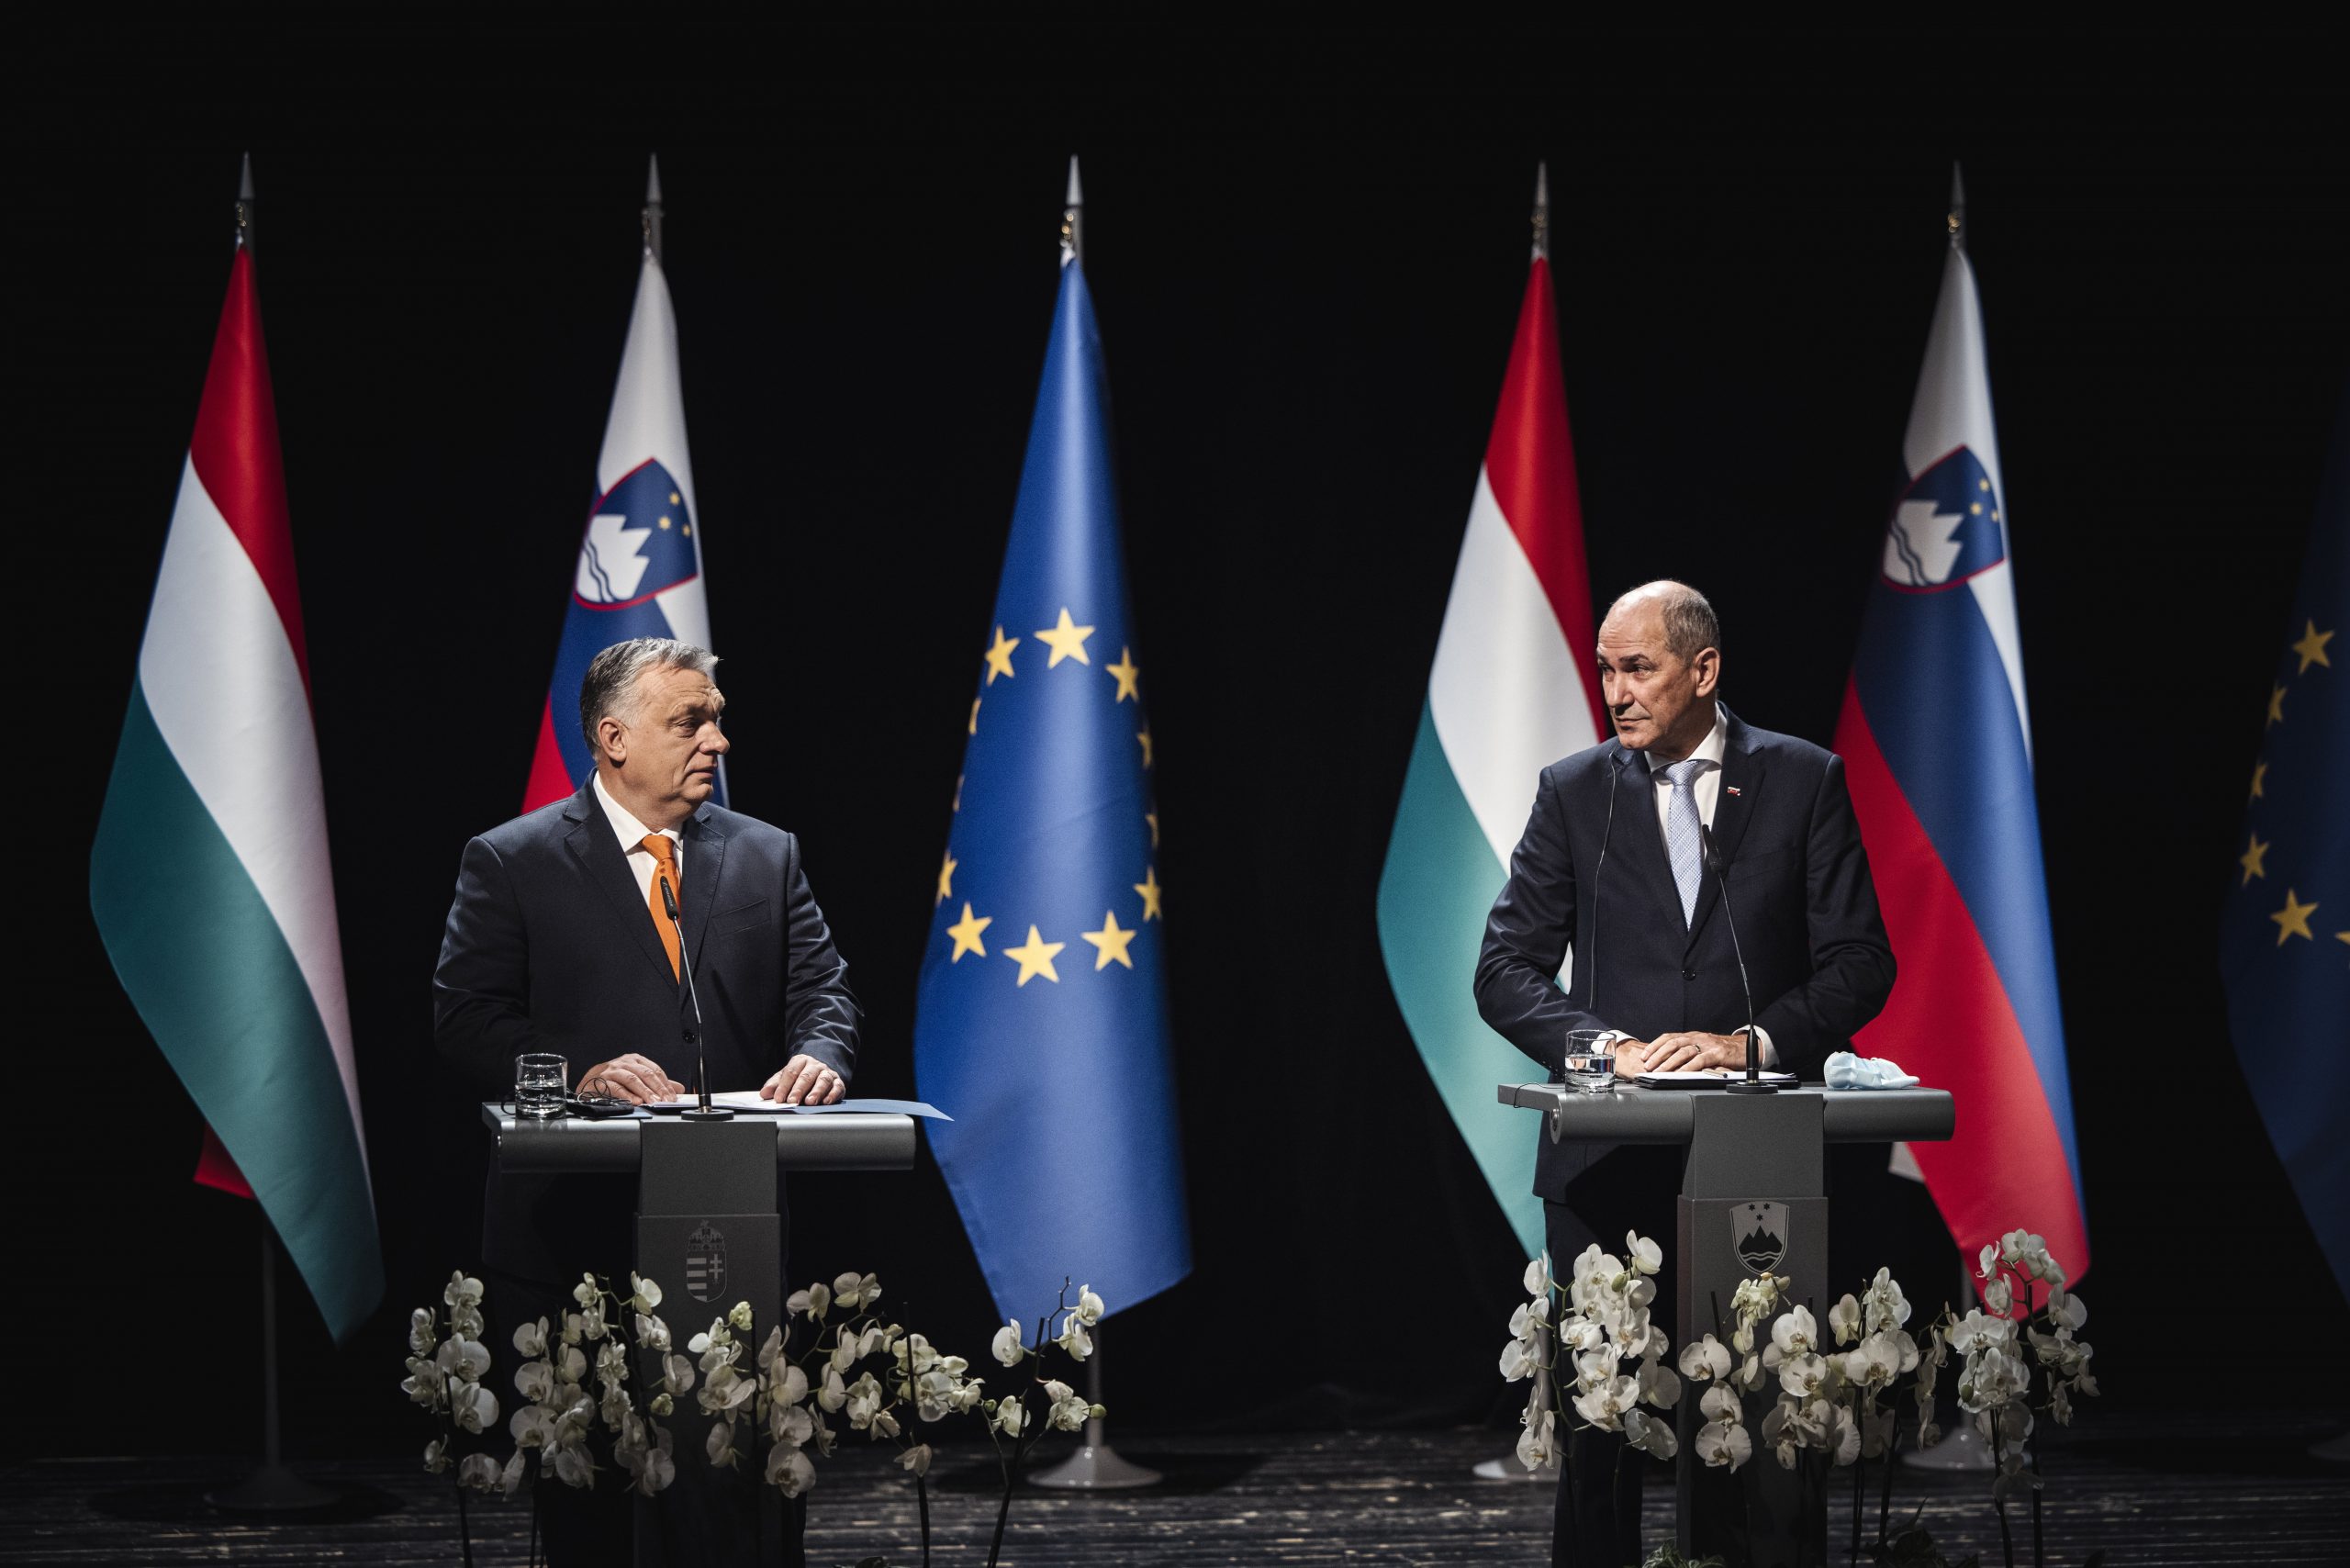 Jansa: Hungary-Slovenia Deal Enables More Comprehensive Cooperation